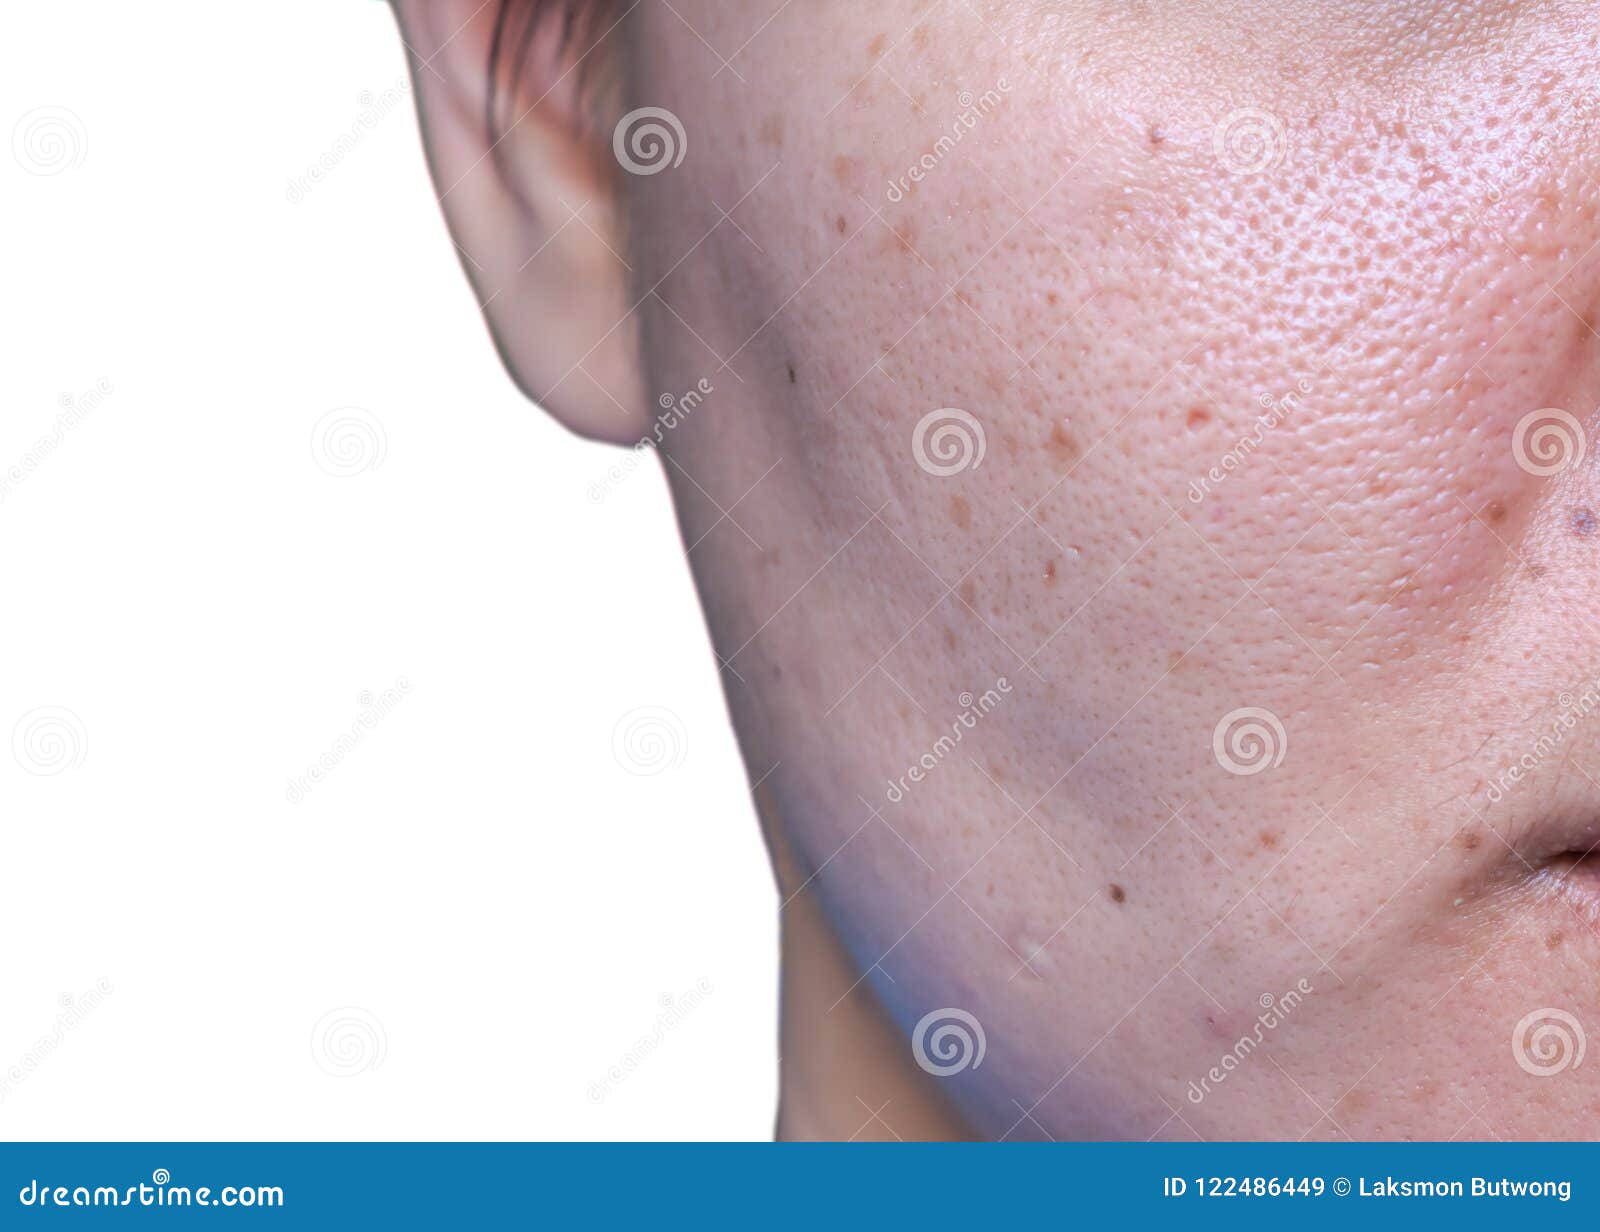 woman `s problematic skin , acne scars ,oily skin and pore, dark spots and blackhead and whitehead on the face